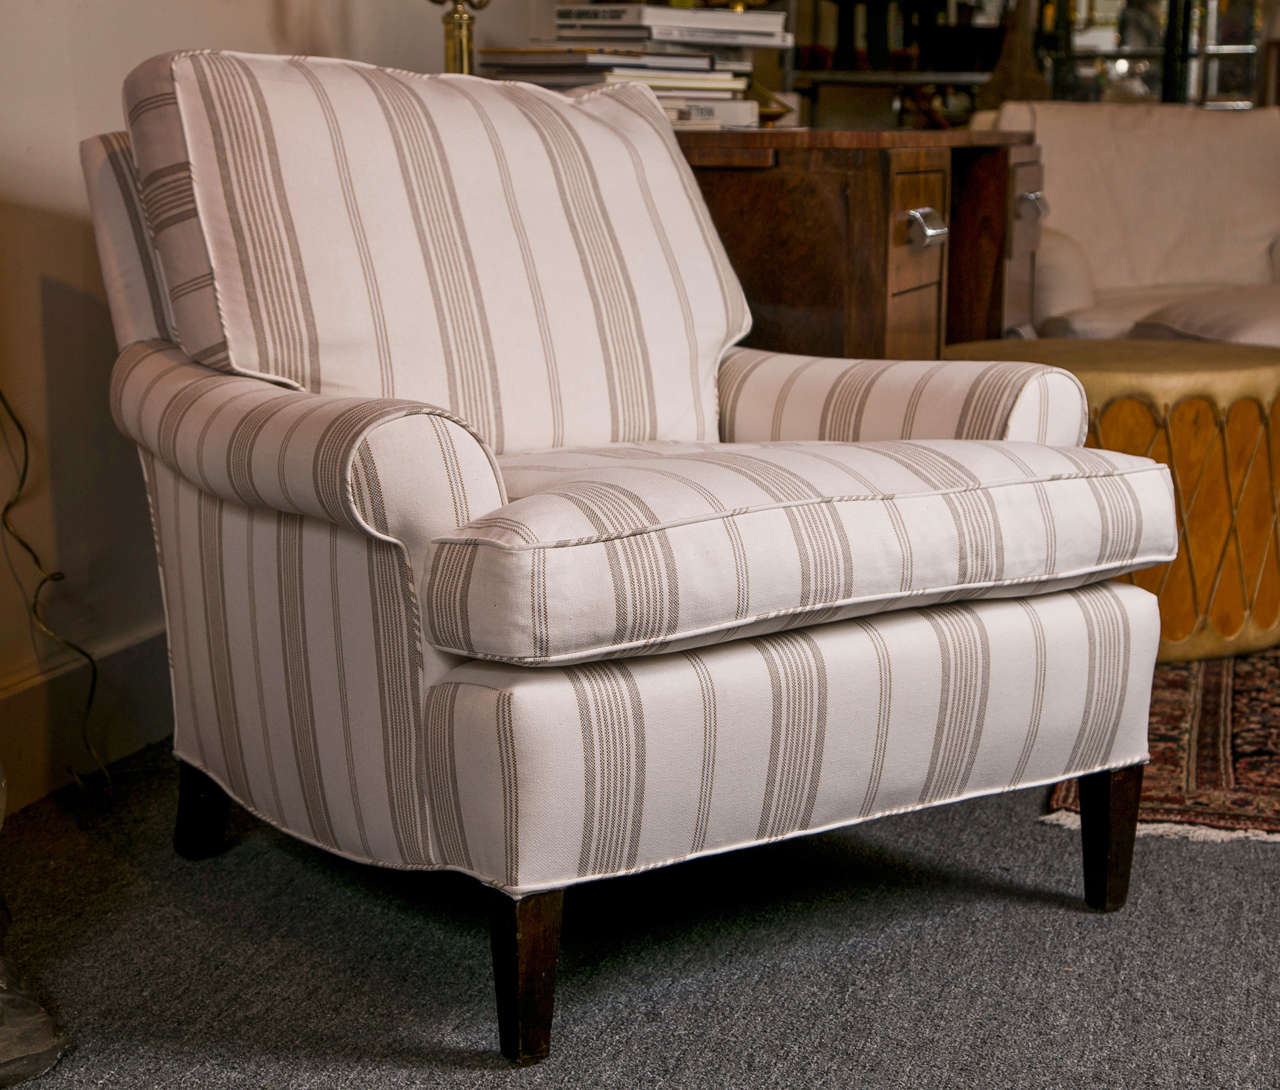 striped chair and ottoman